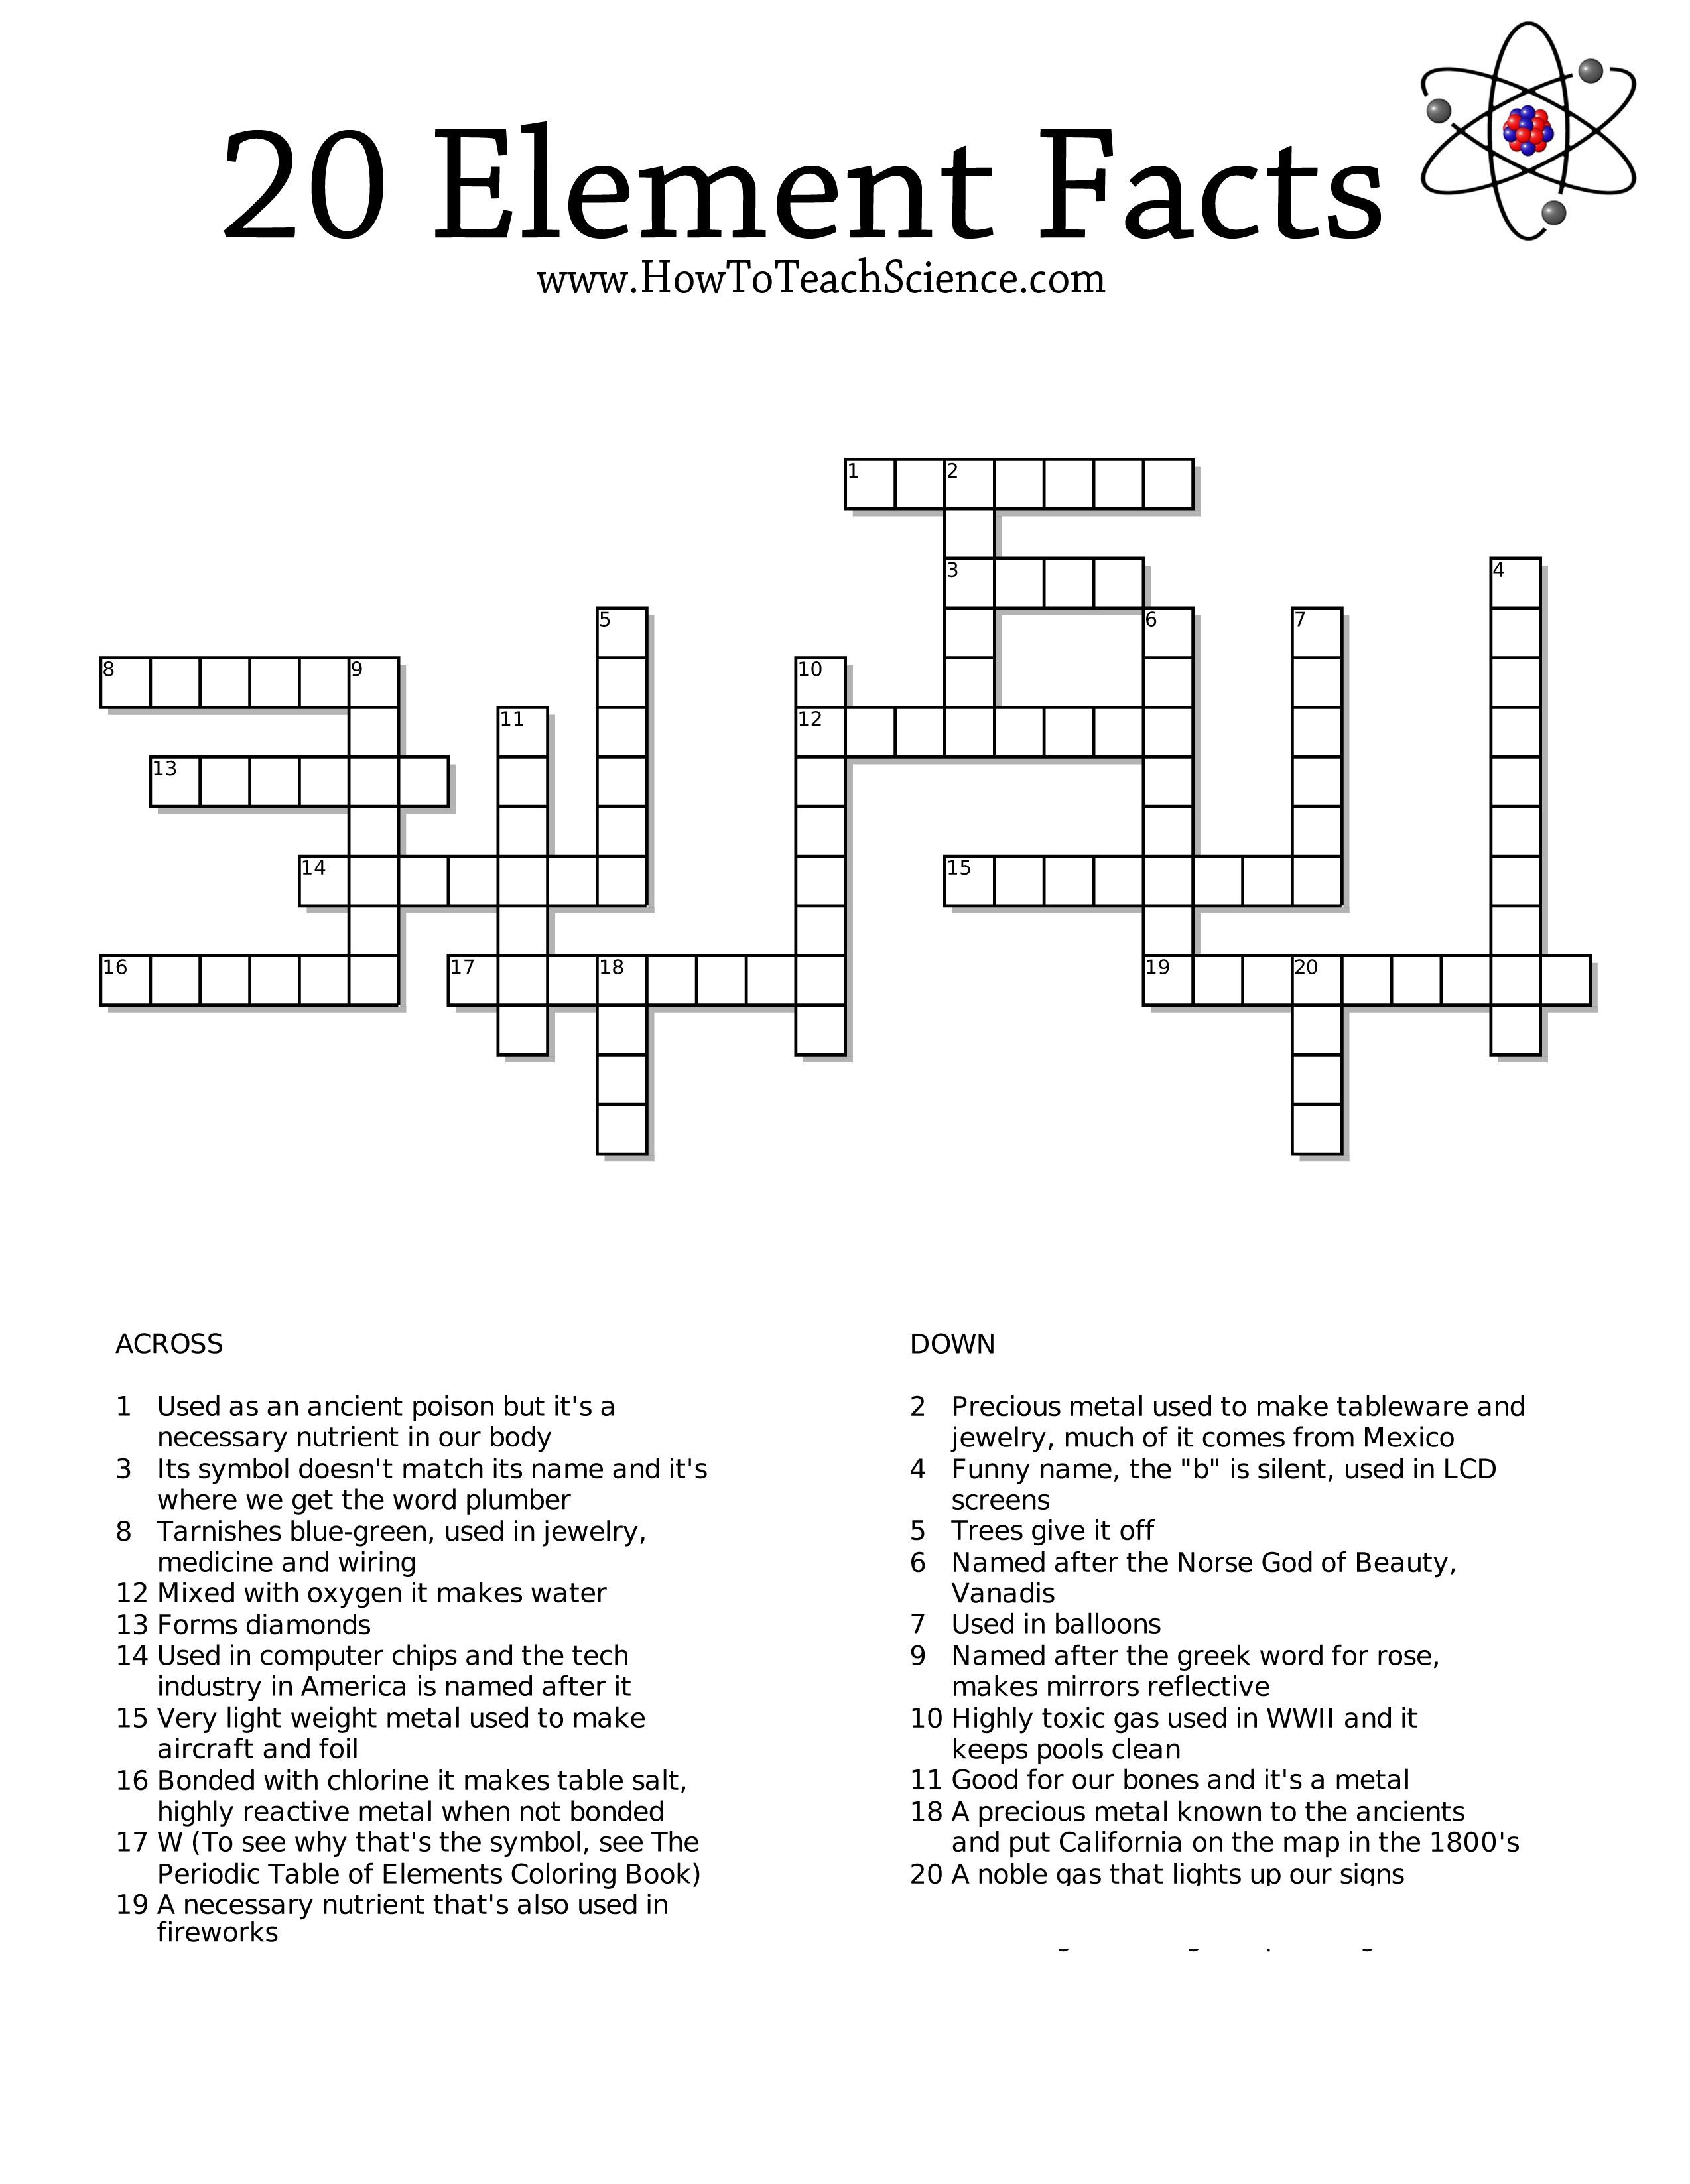 Free Crossword Printables On The Elements For 3Rd Grade Through High - Free Printable Crossword Puzzles For 6Th Graders